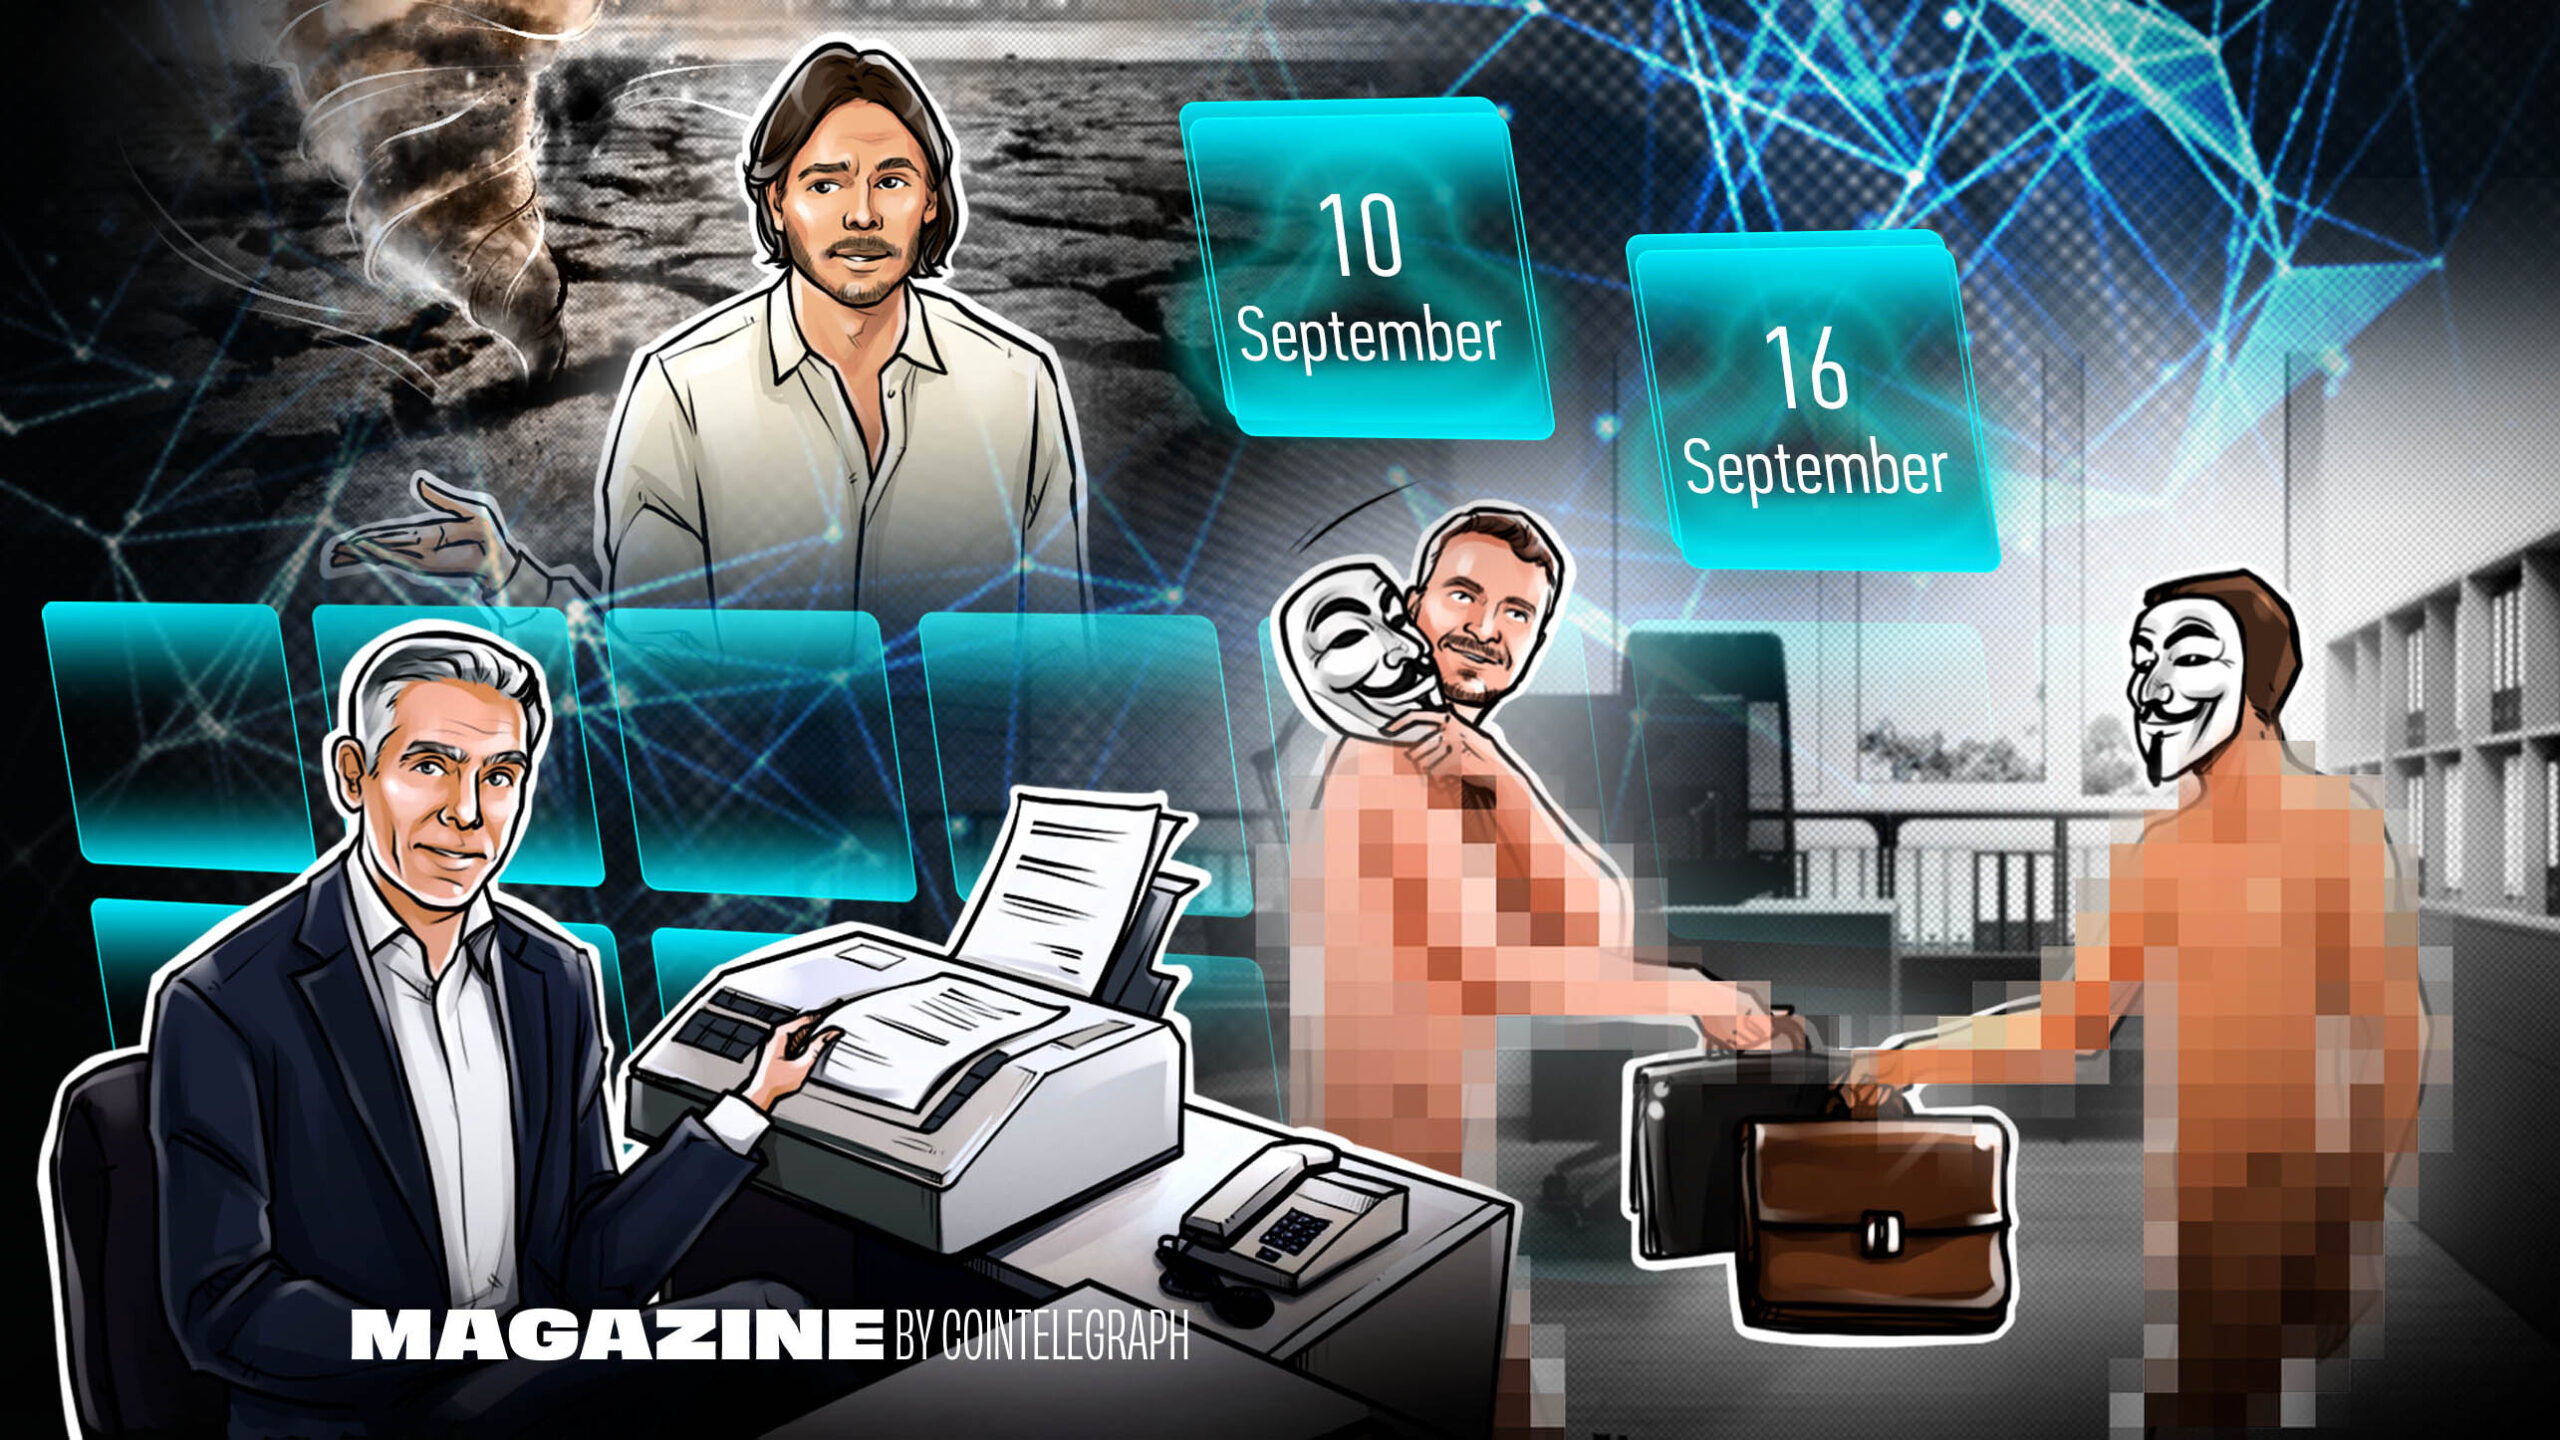 Paxos’-$500k-bitcoin-fee,-ftx-tokens-sales-set-to-begin-and-other-news:-hodler’s-digest,-sept.-10-16